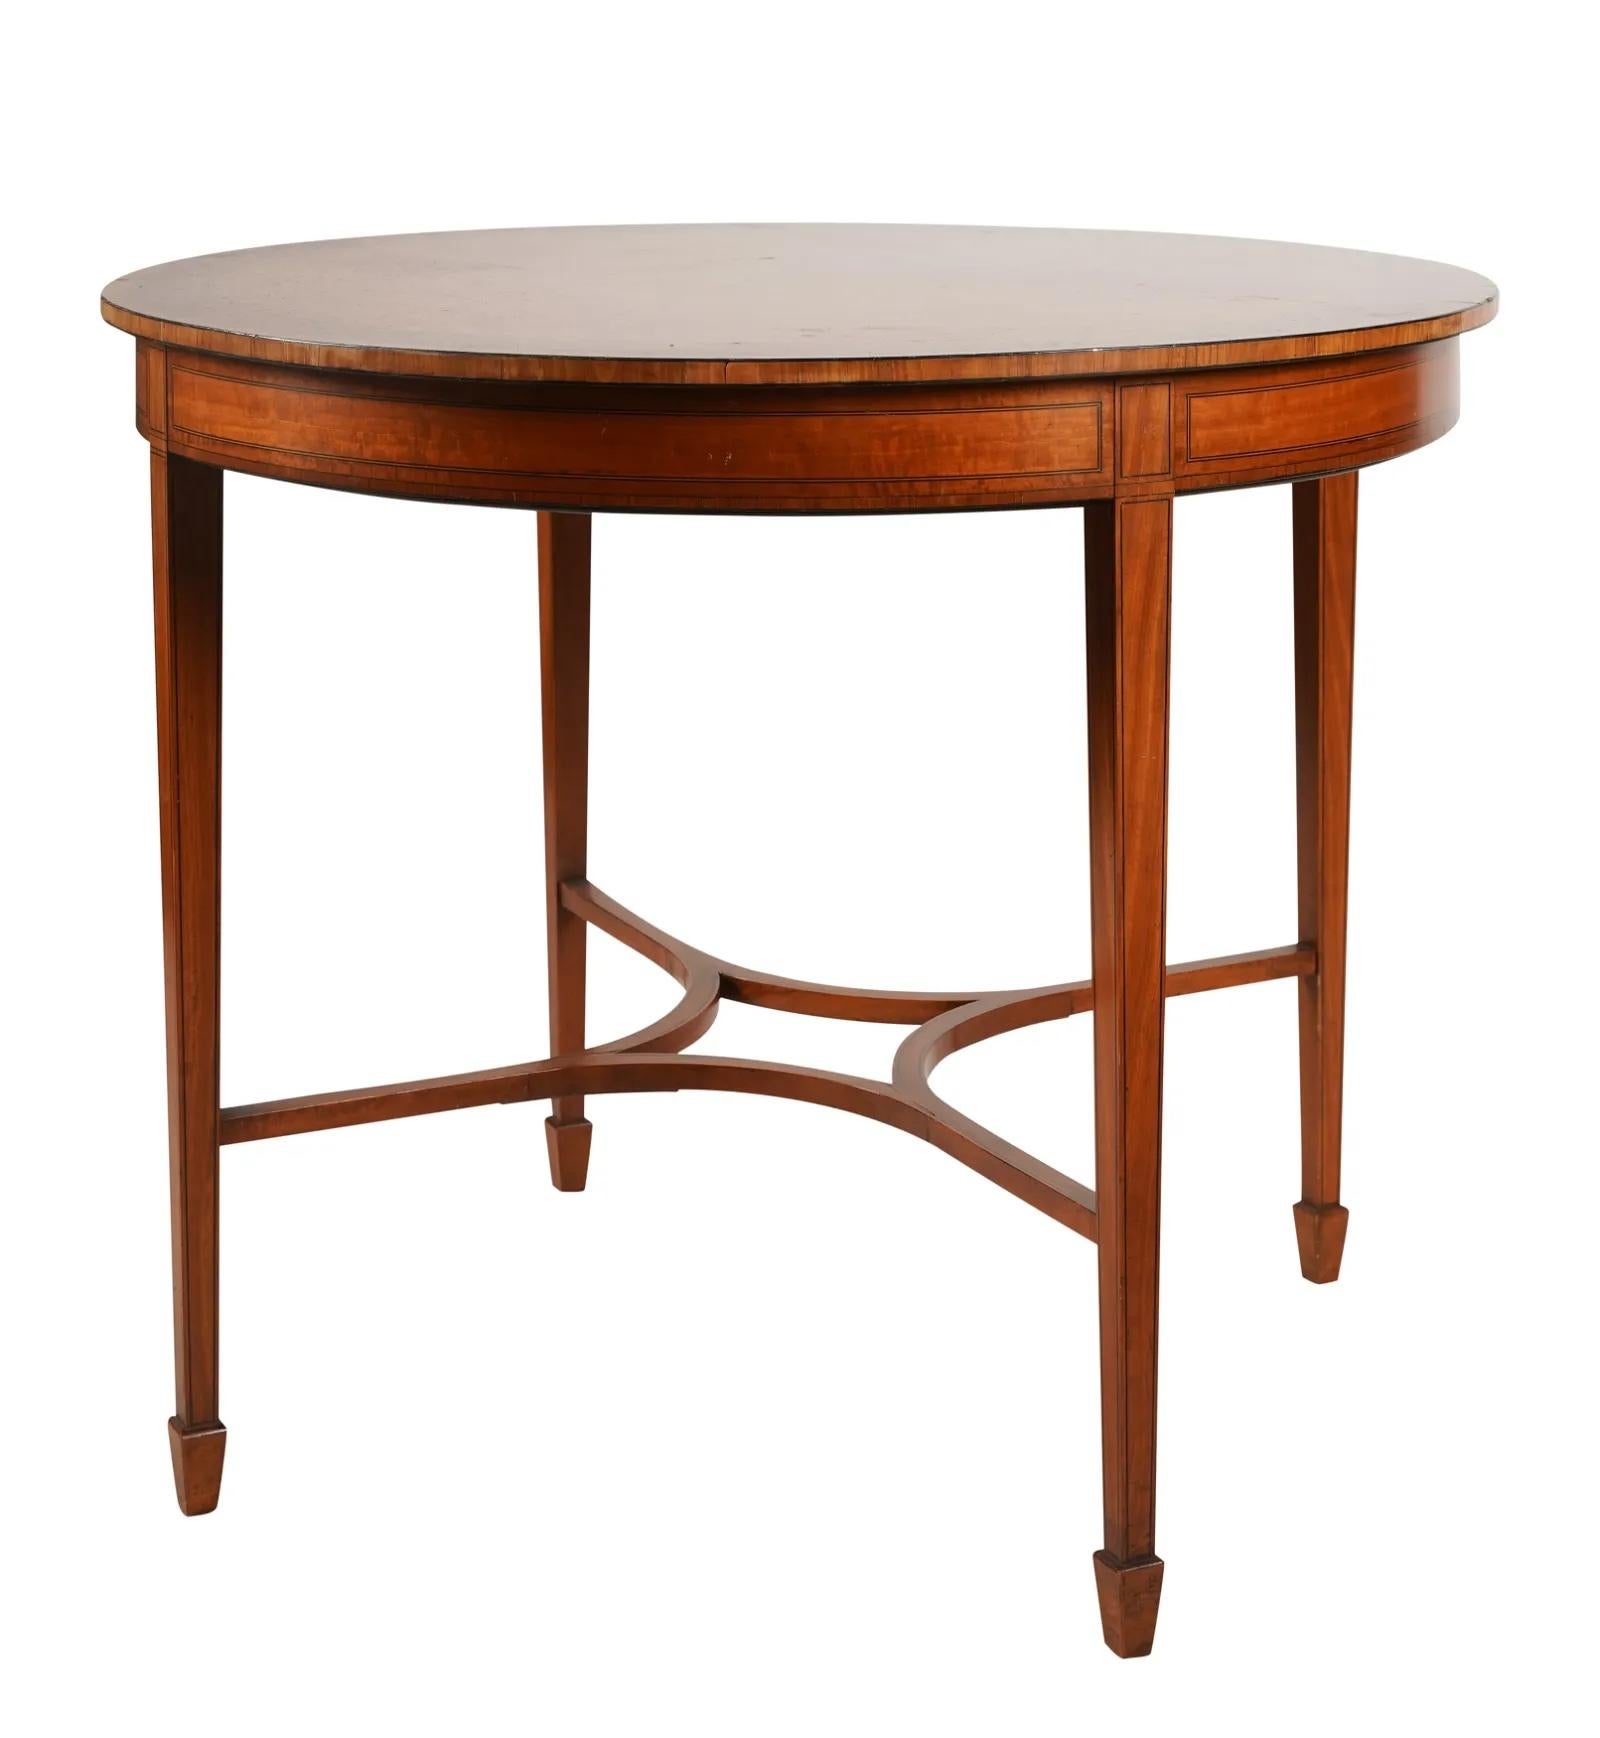 Circa 1900 Antique Edwardian Inlaid & Marquetry Mixed Woods Center / Side Table. Satinwood, Walnut, Ebony. Quartered satinwood pattern line inlaid with ebony strip surrounded by walnut edge banding. Inlaid panels on side aprons and legs. 